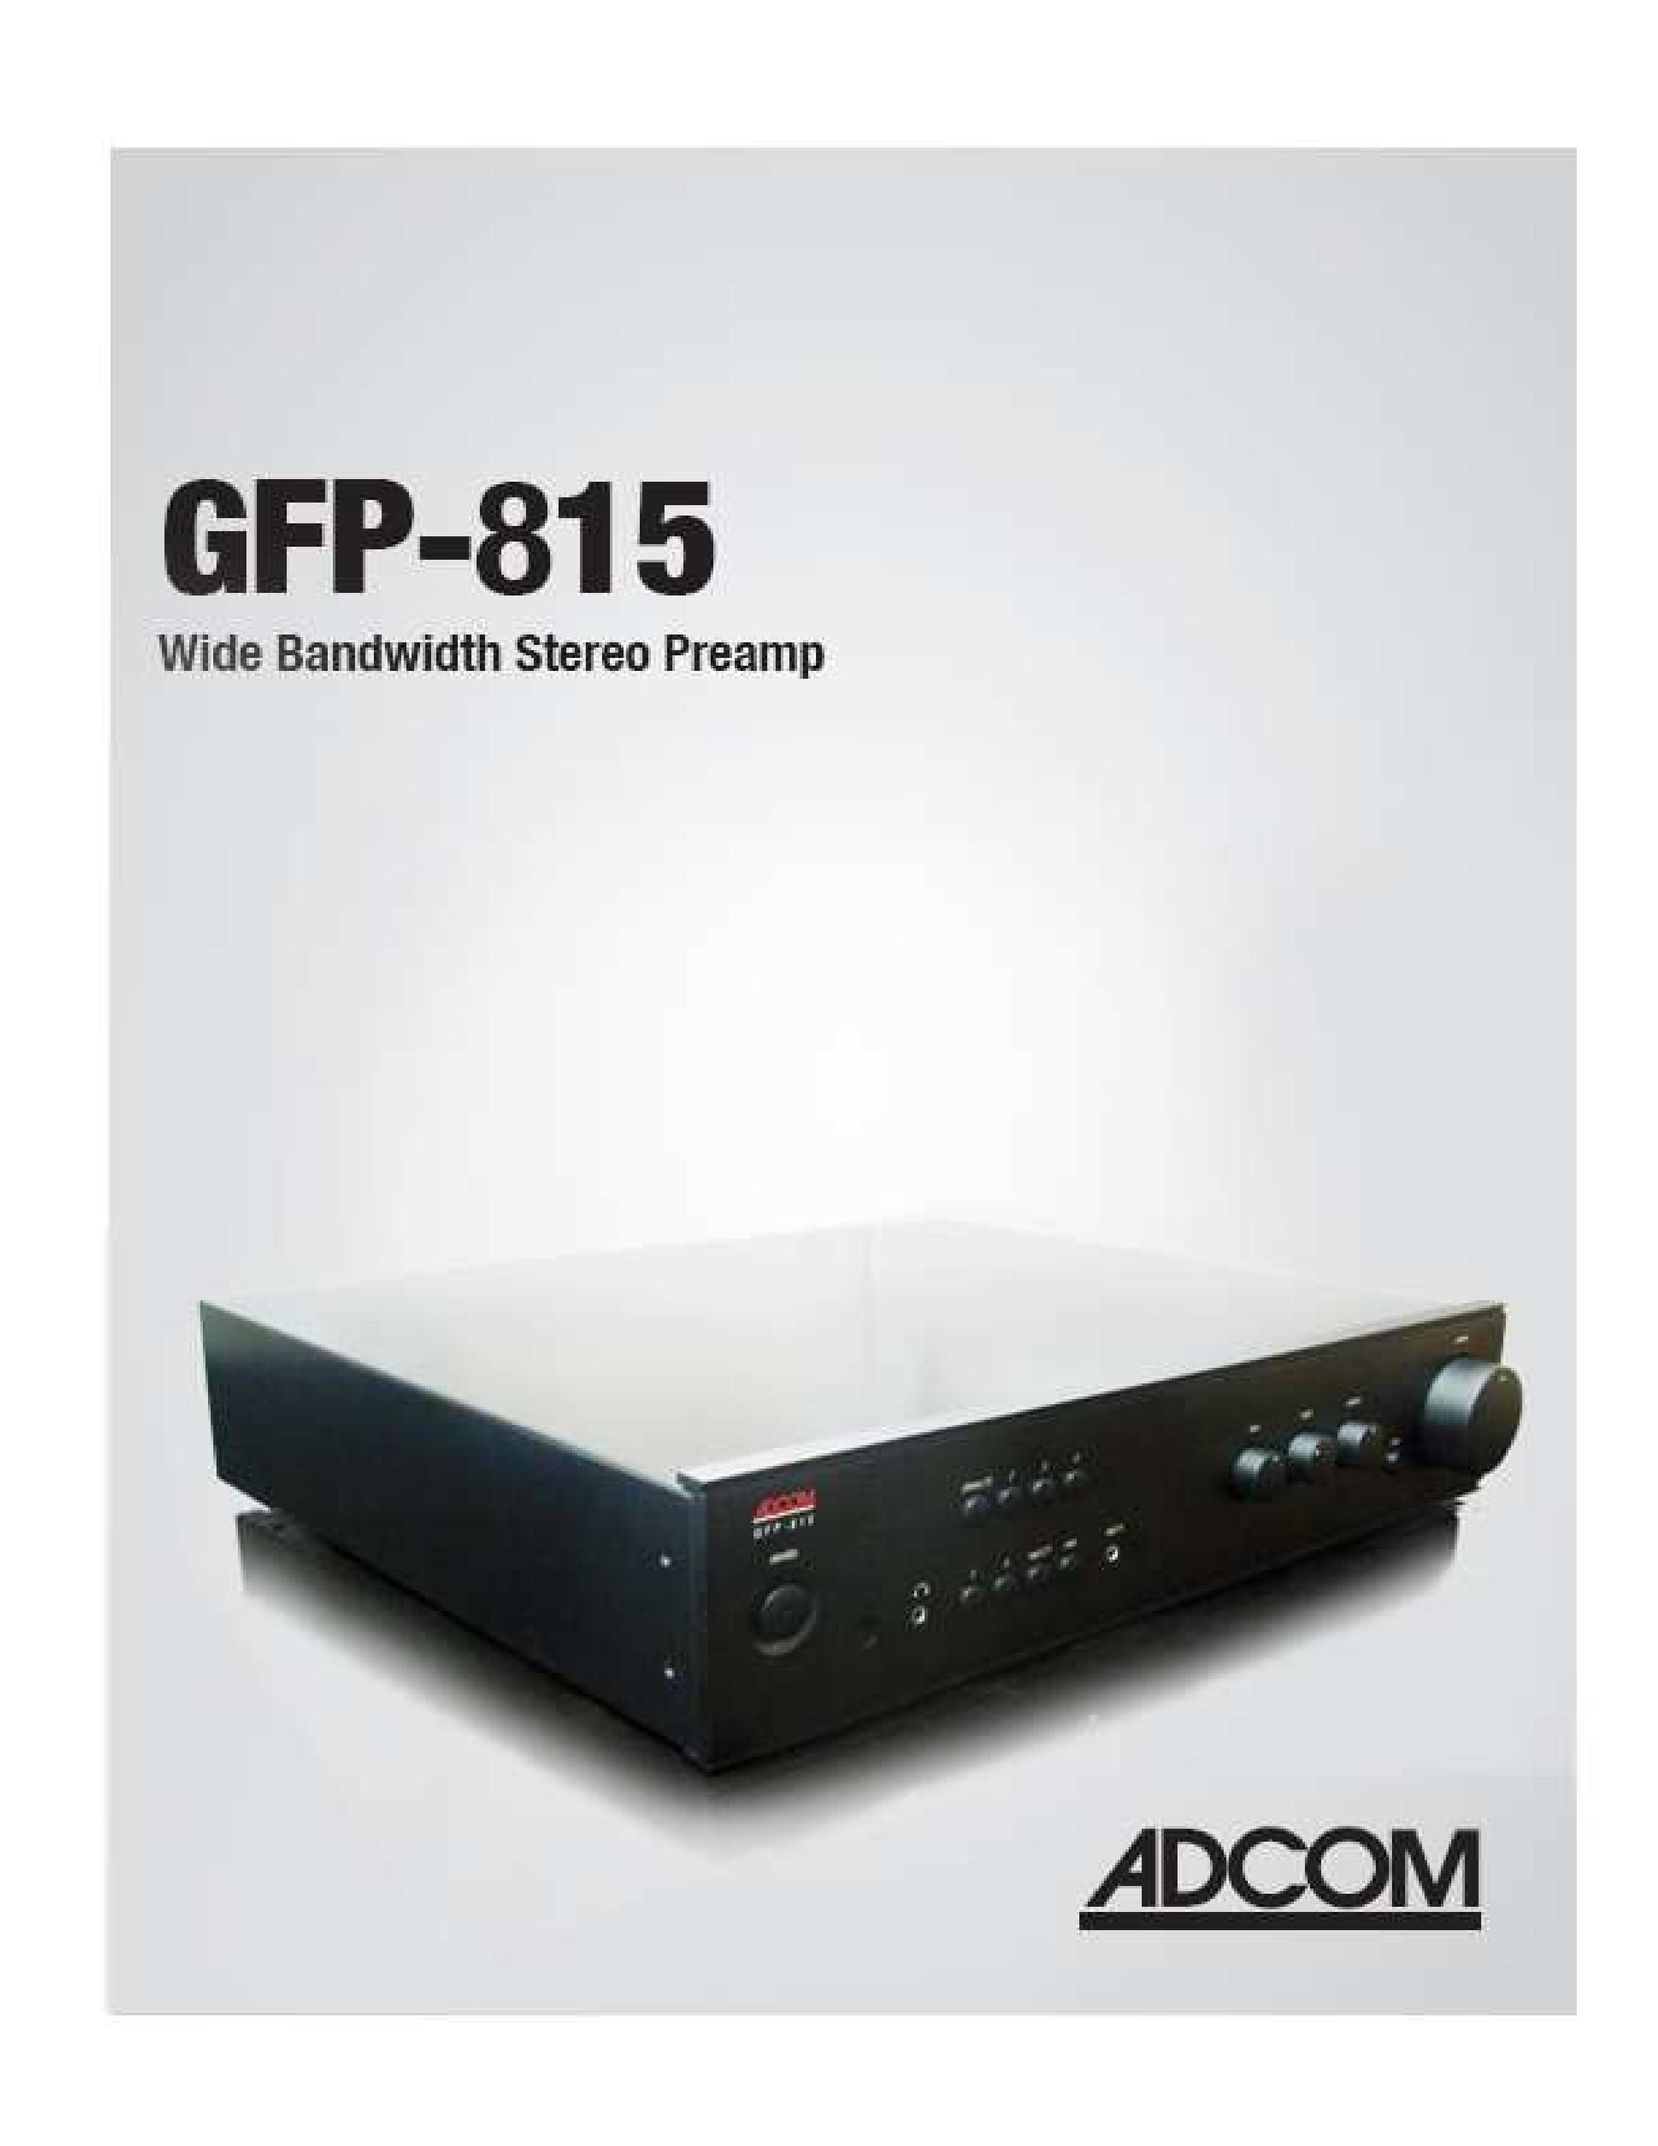 Adcom GFP-815 Home Theater System User Manual